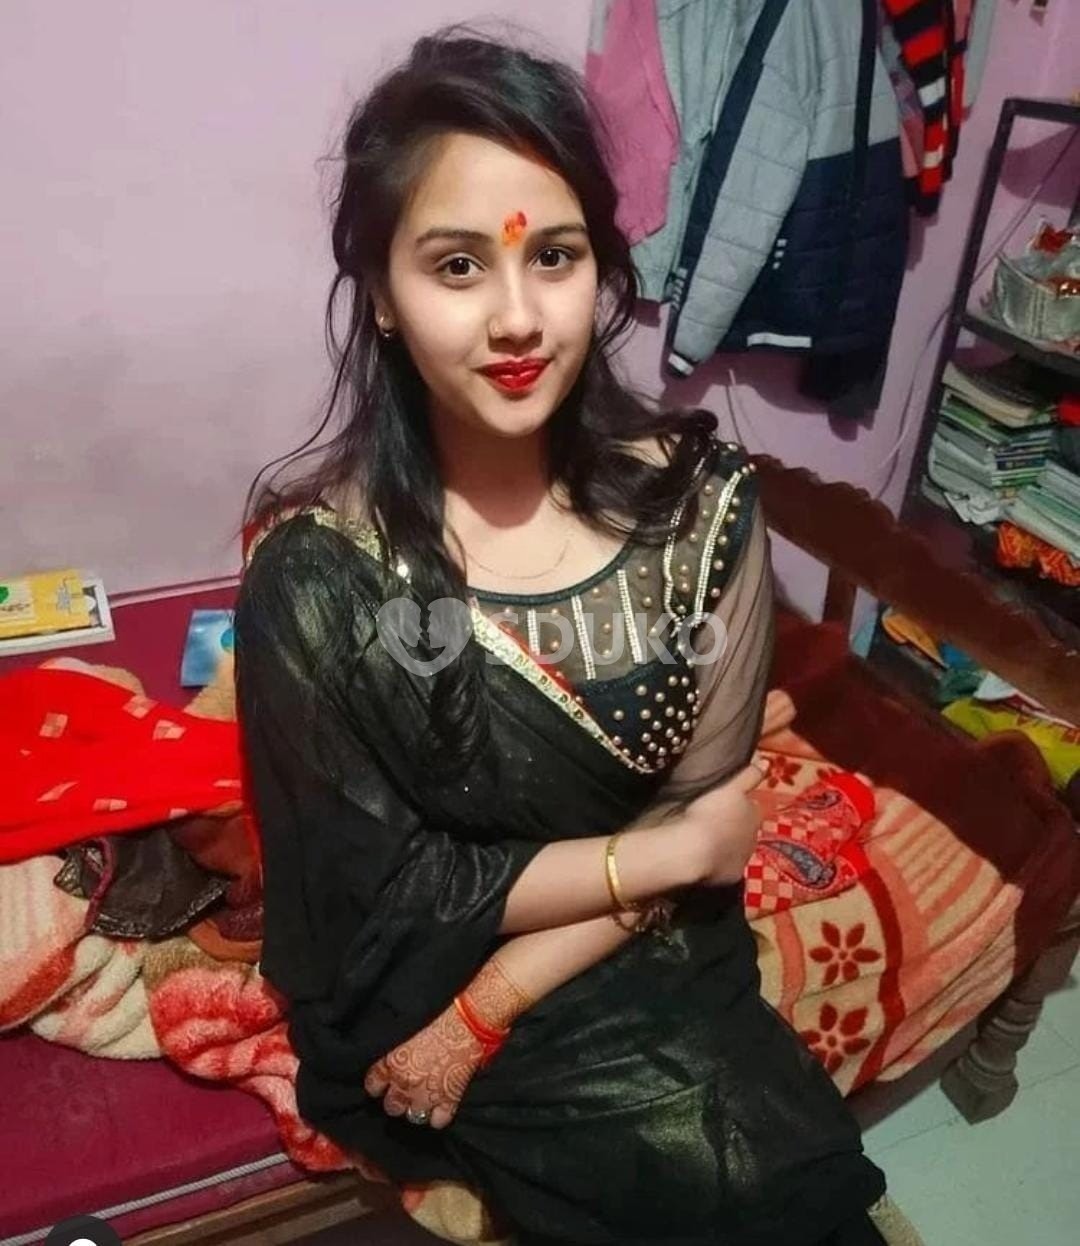 Ambattur ANJUBAI VIP INDEPENDENT GIRLS AVAILABLE IN LOW PRICE